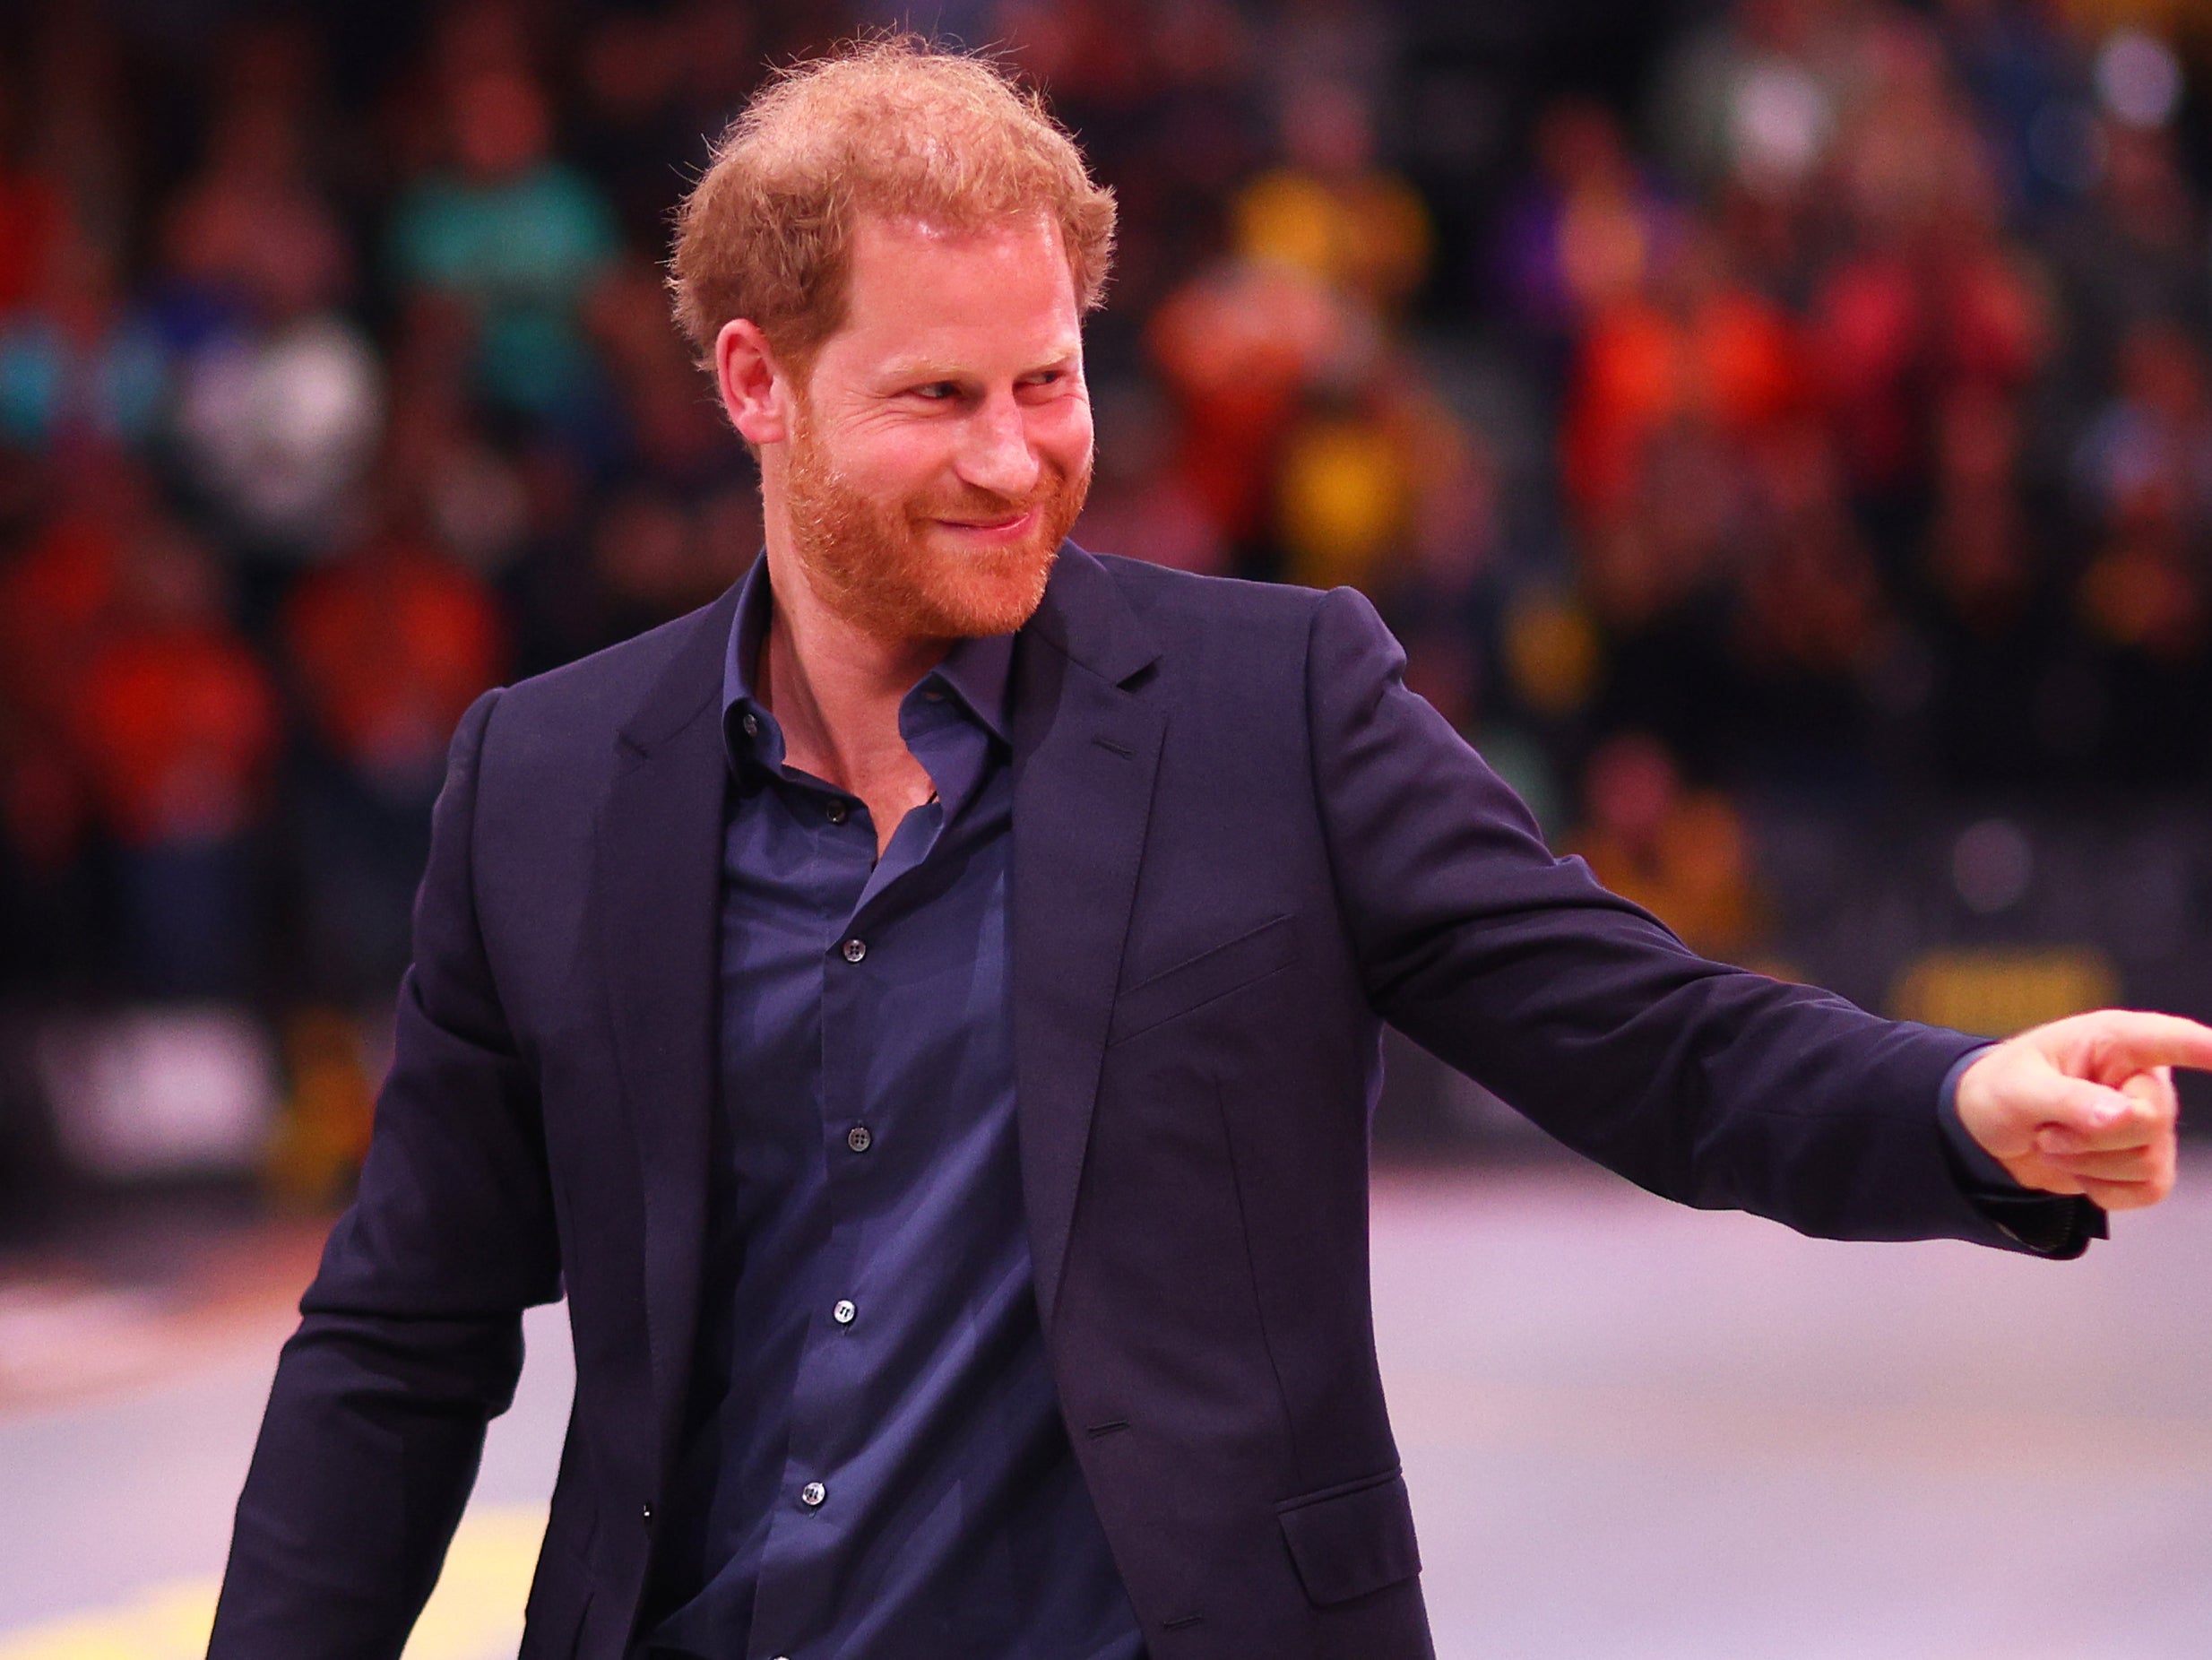 Prince Harry has spoken candidly about his mental health struggles in the past